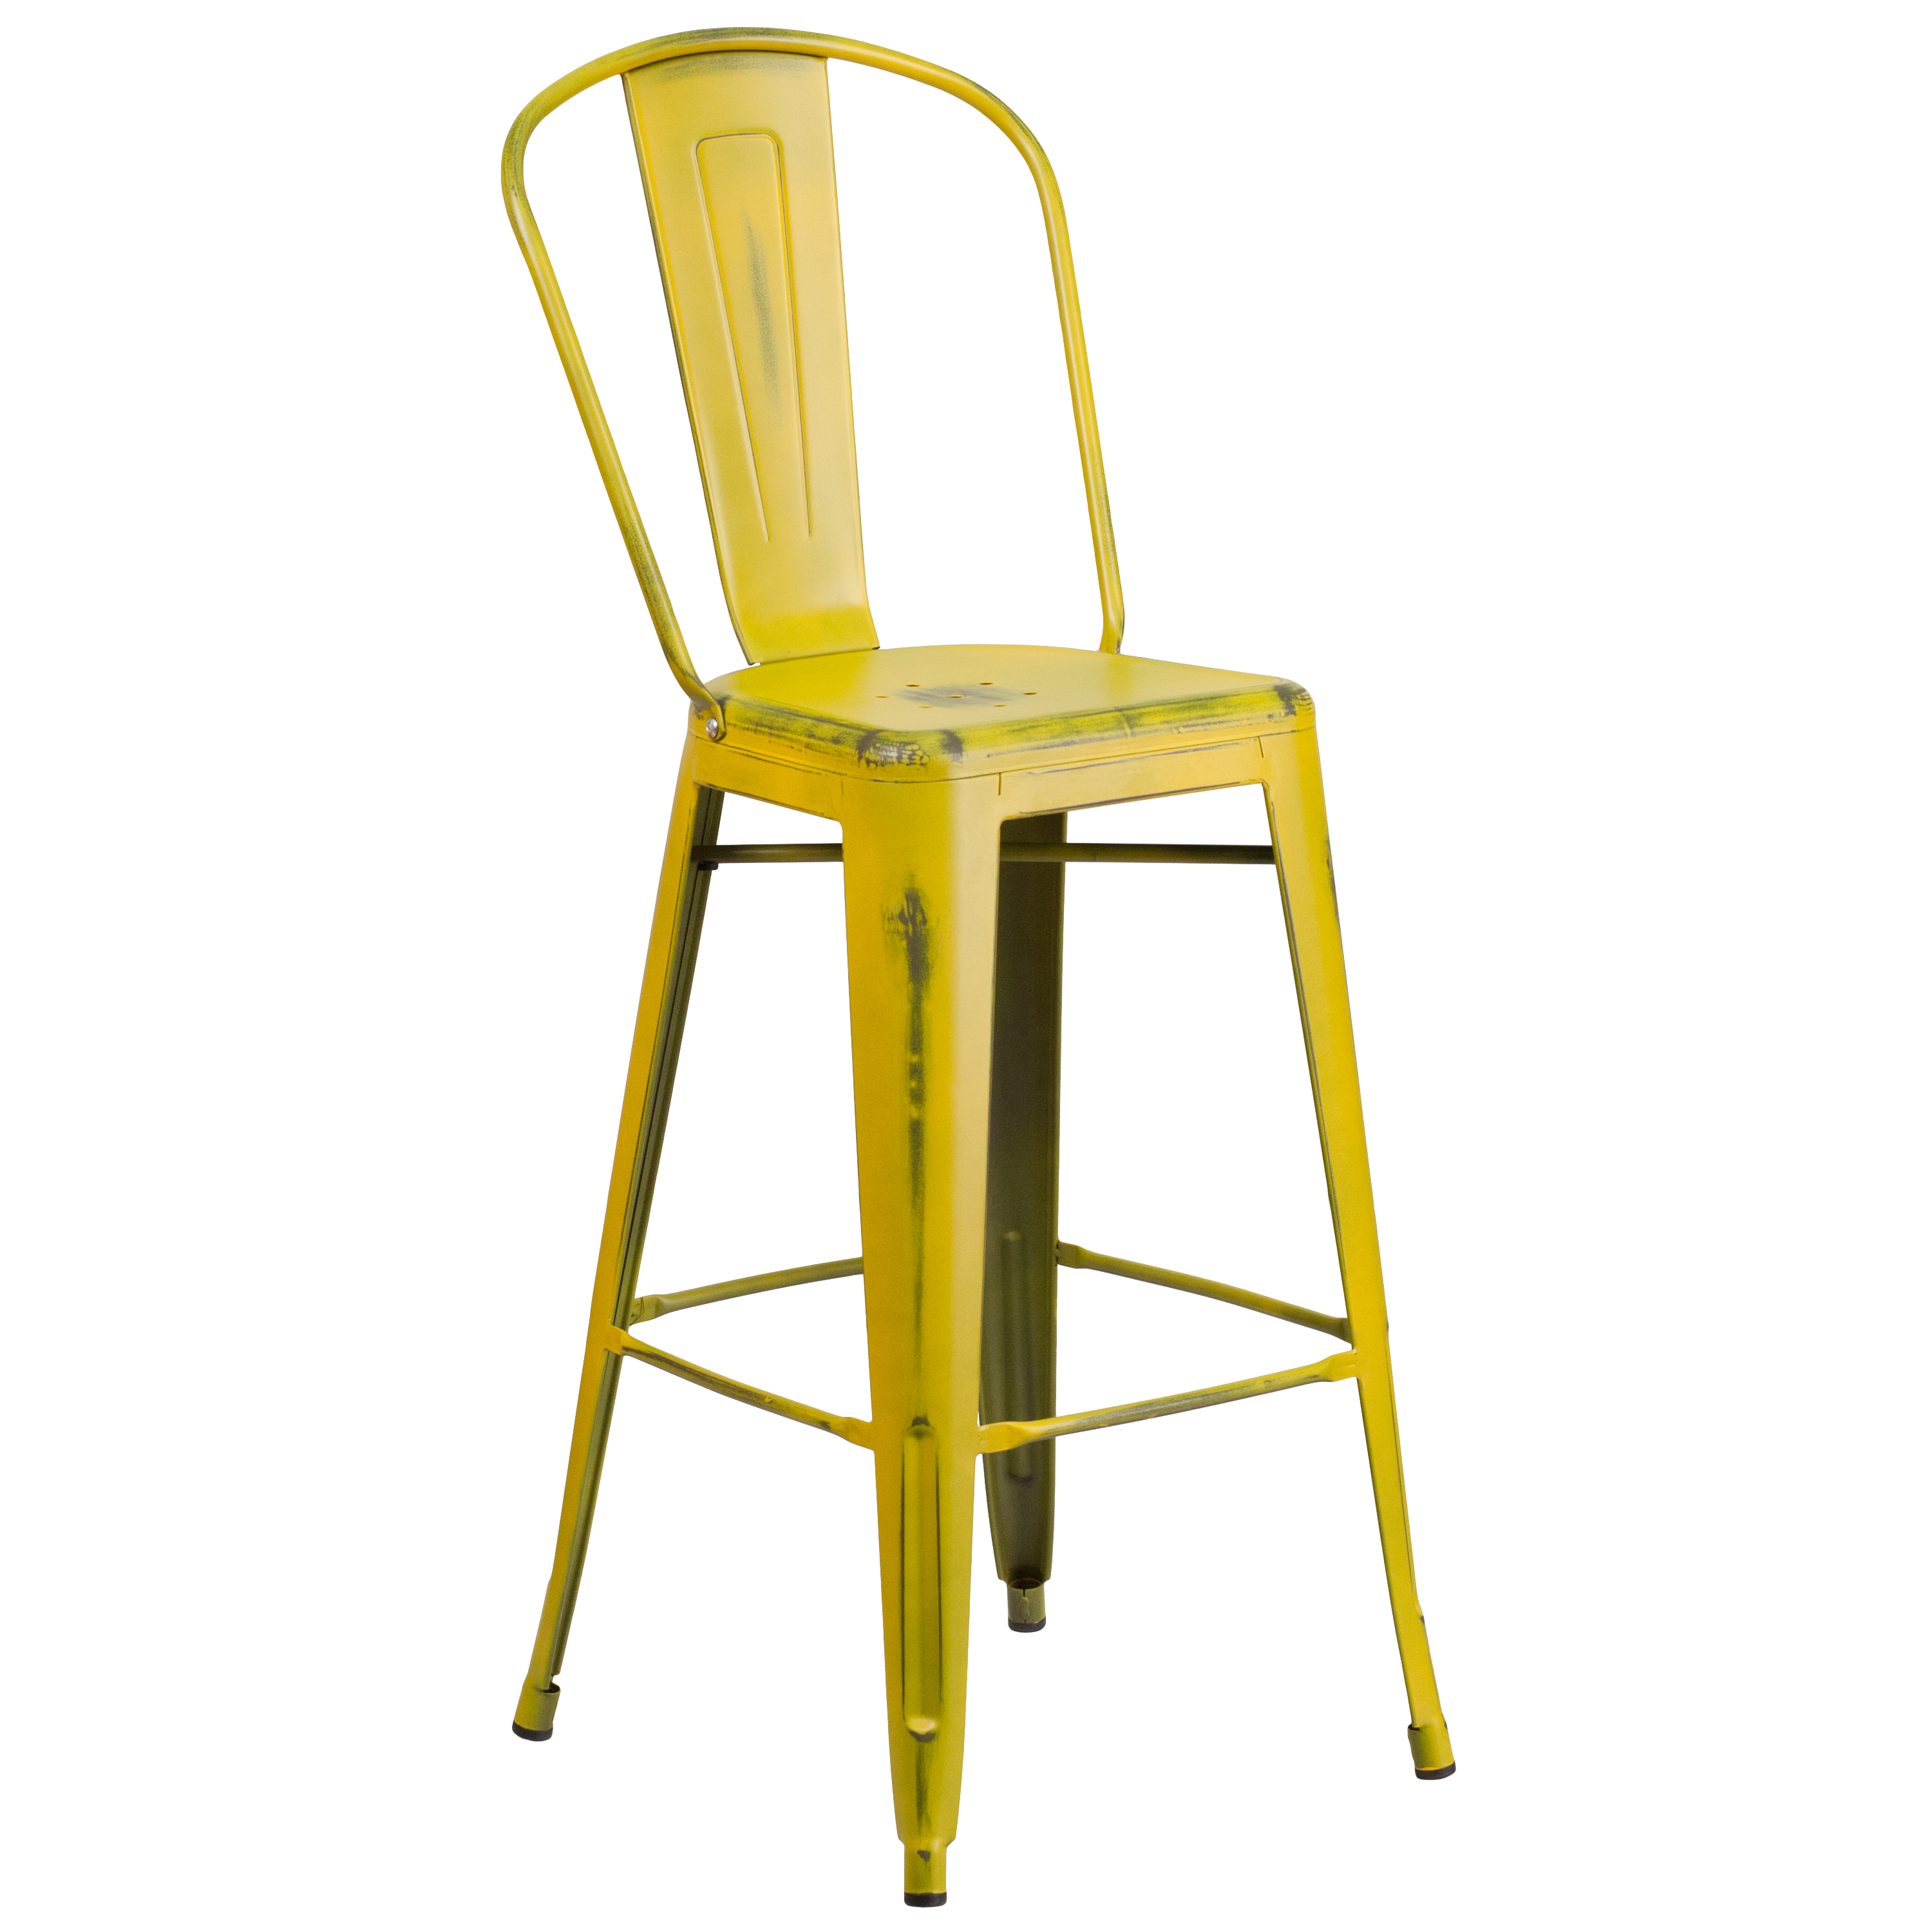 Flash Furniture ET-3534-30-YL-GG 30" Distressed Yellow Metal Indoor/Outdoor Barstool with Back